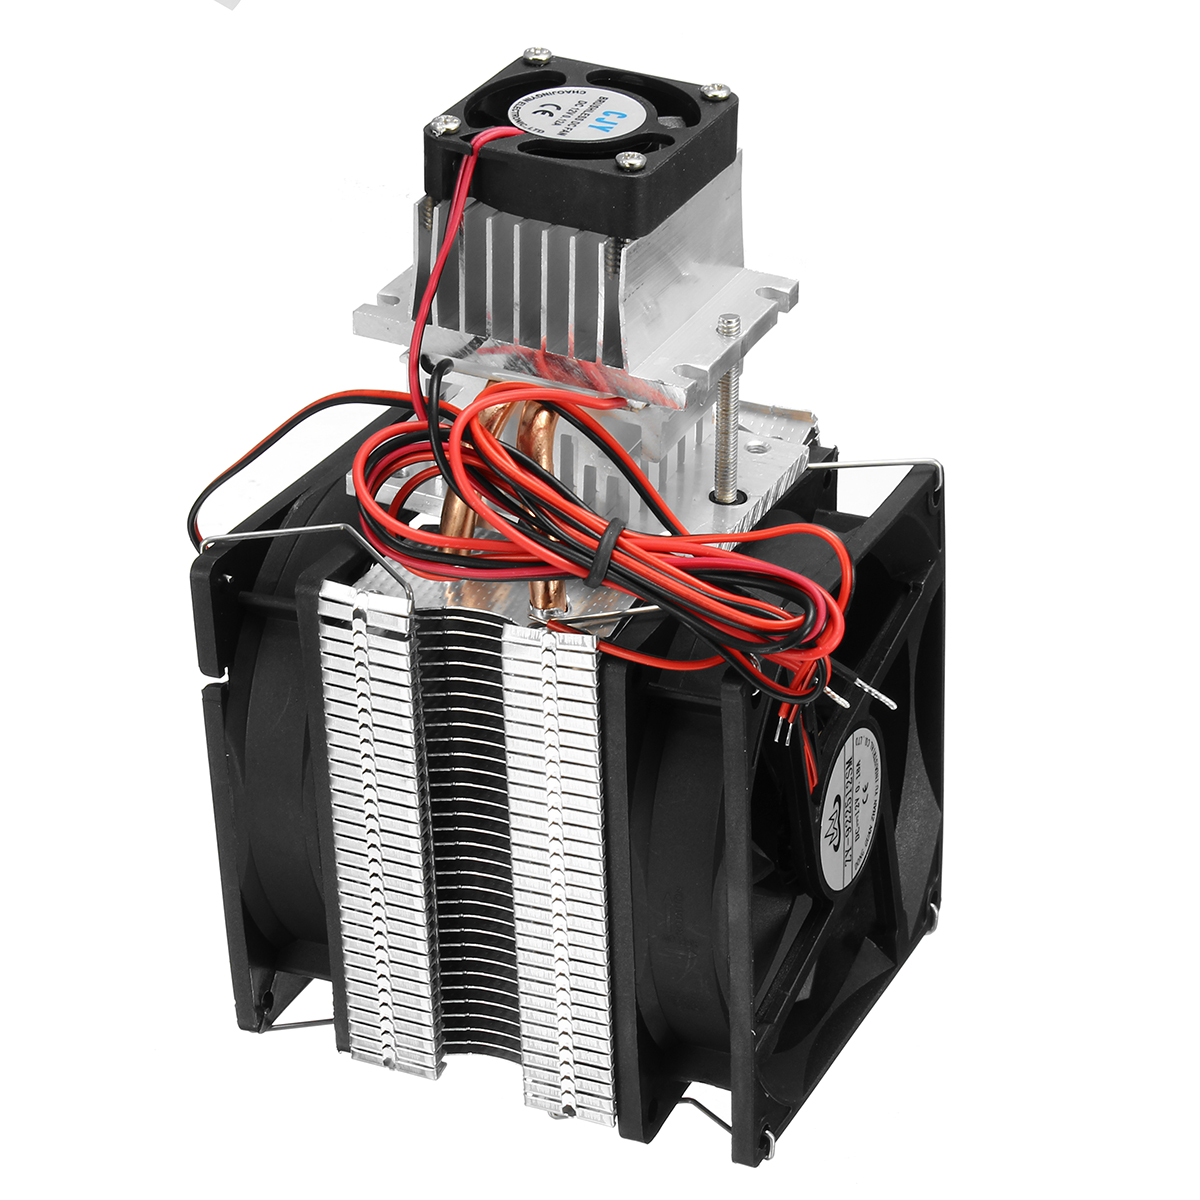 

12V Semiconductor Air Refrigeration Thermoelectric Peltier Cooling System